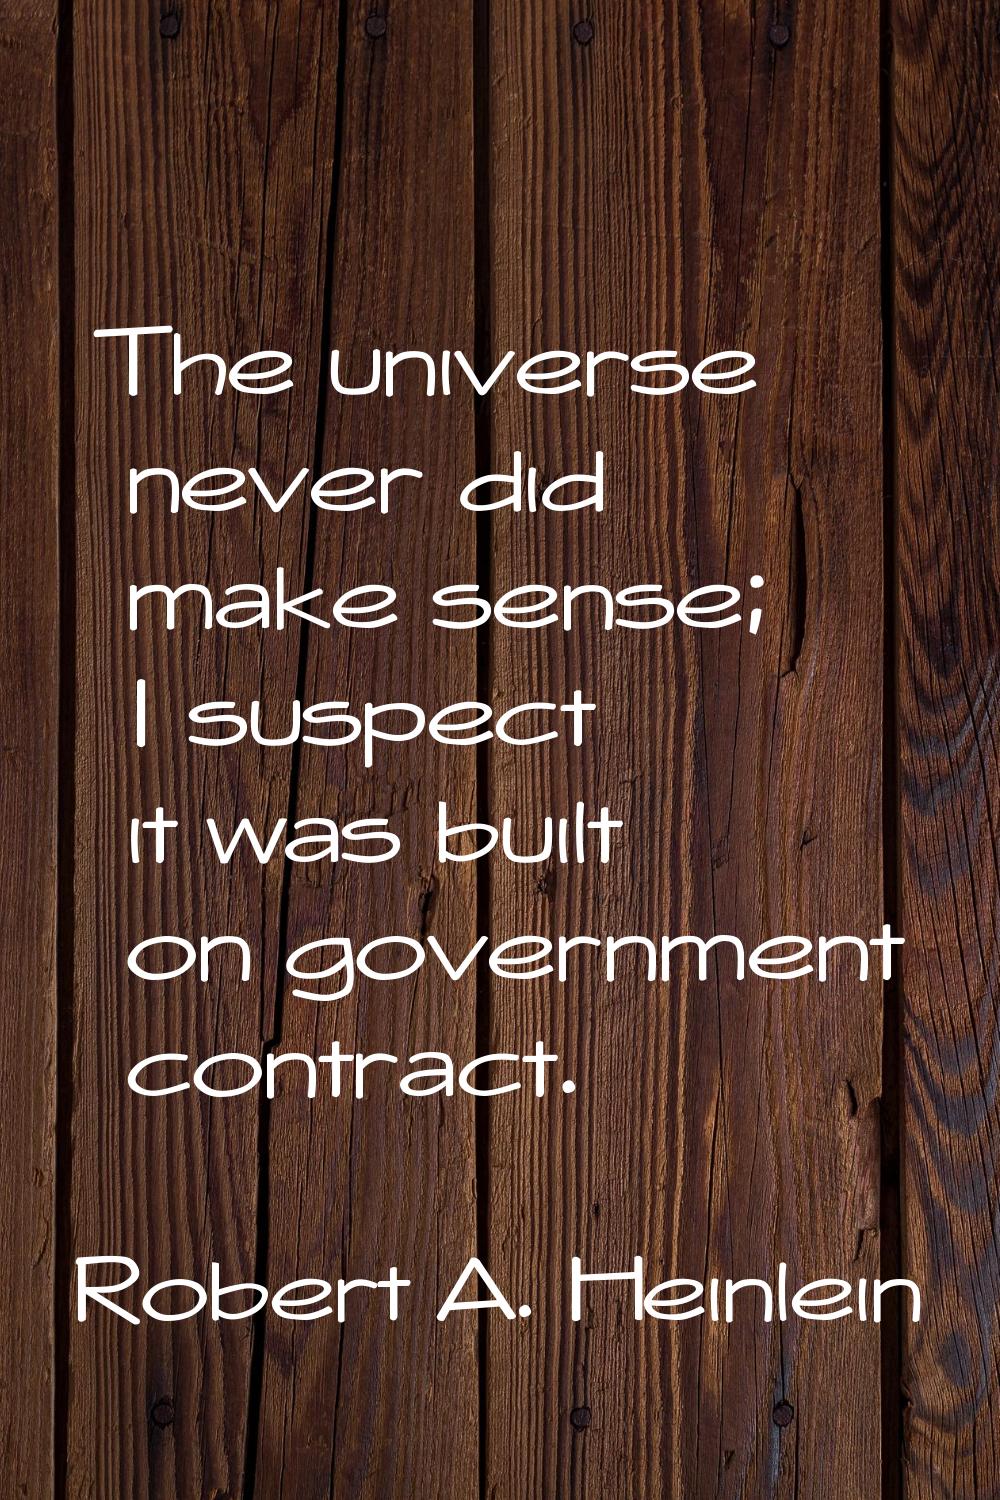 The universe never did make sense; I suspect it was built on government contract.